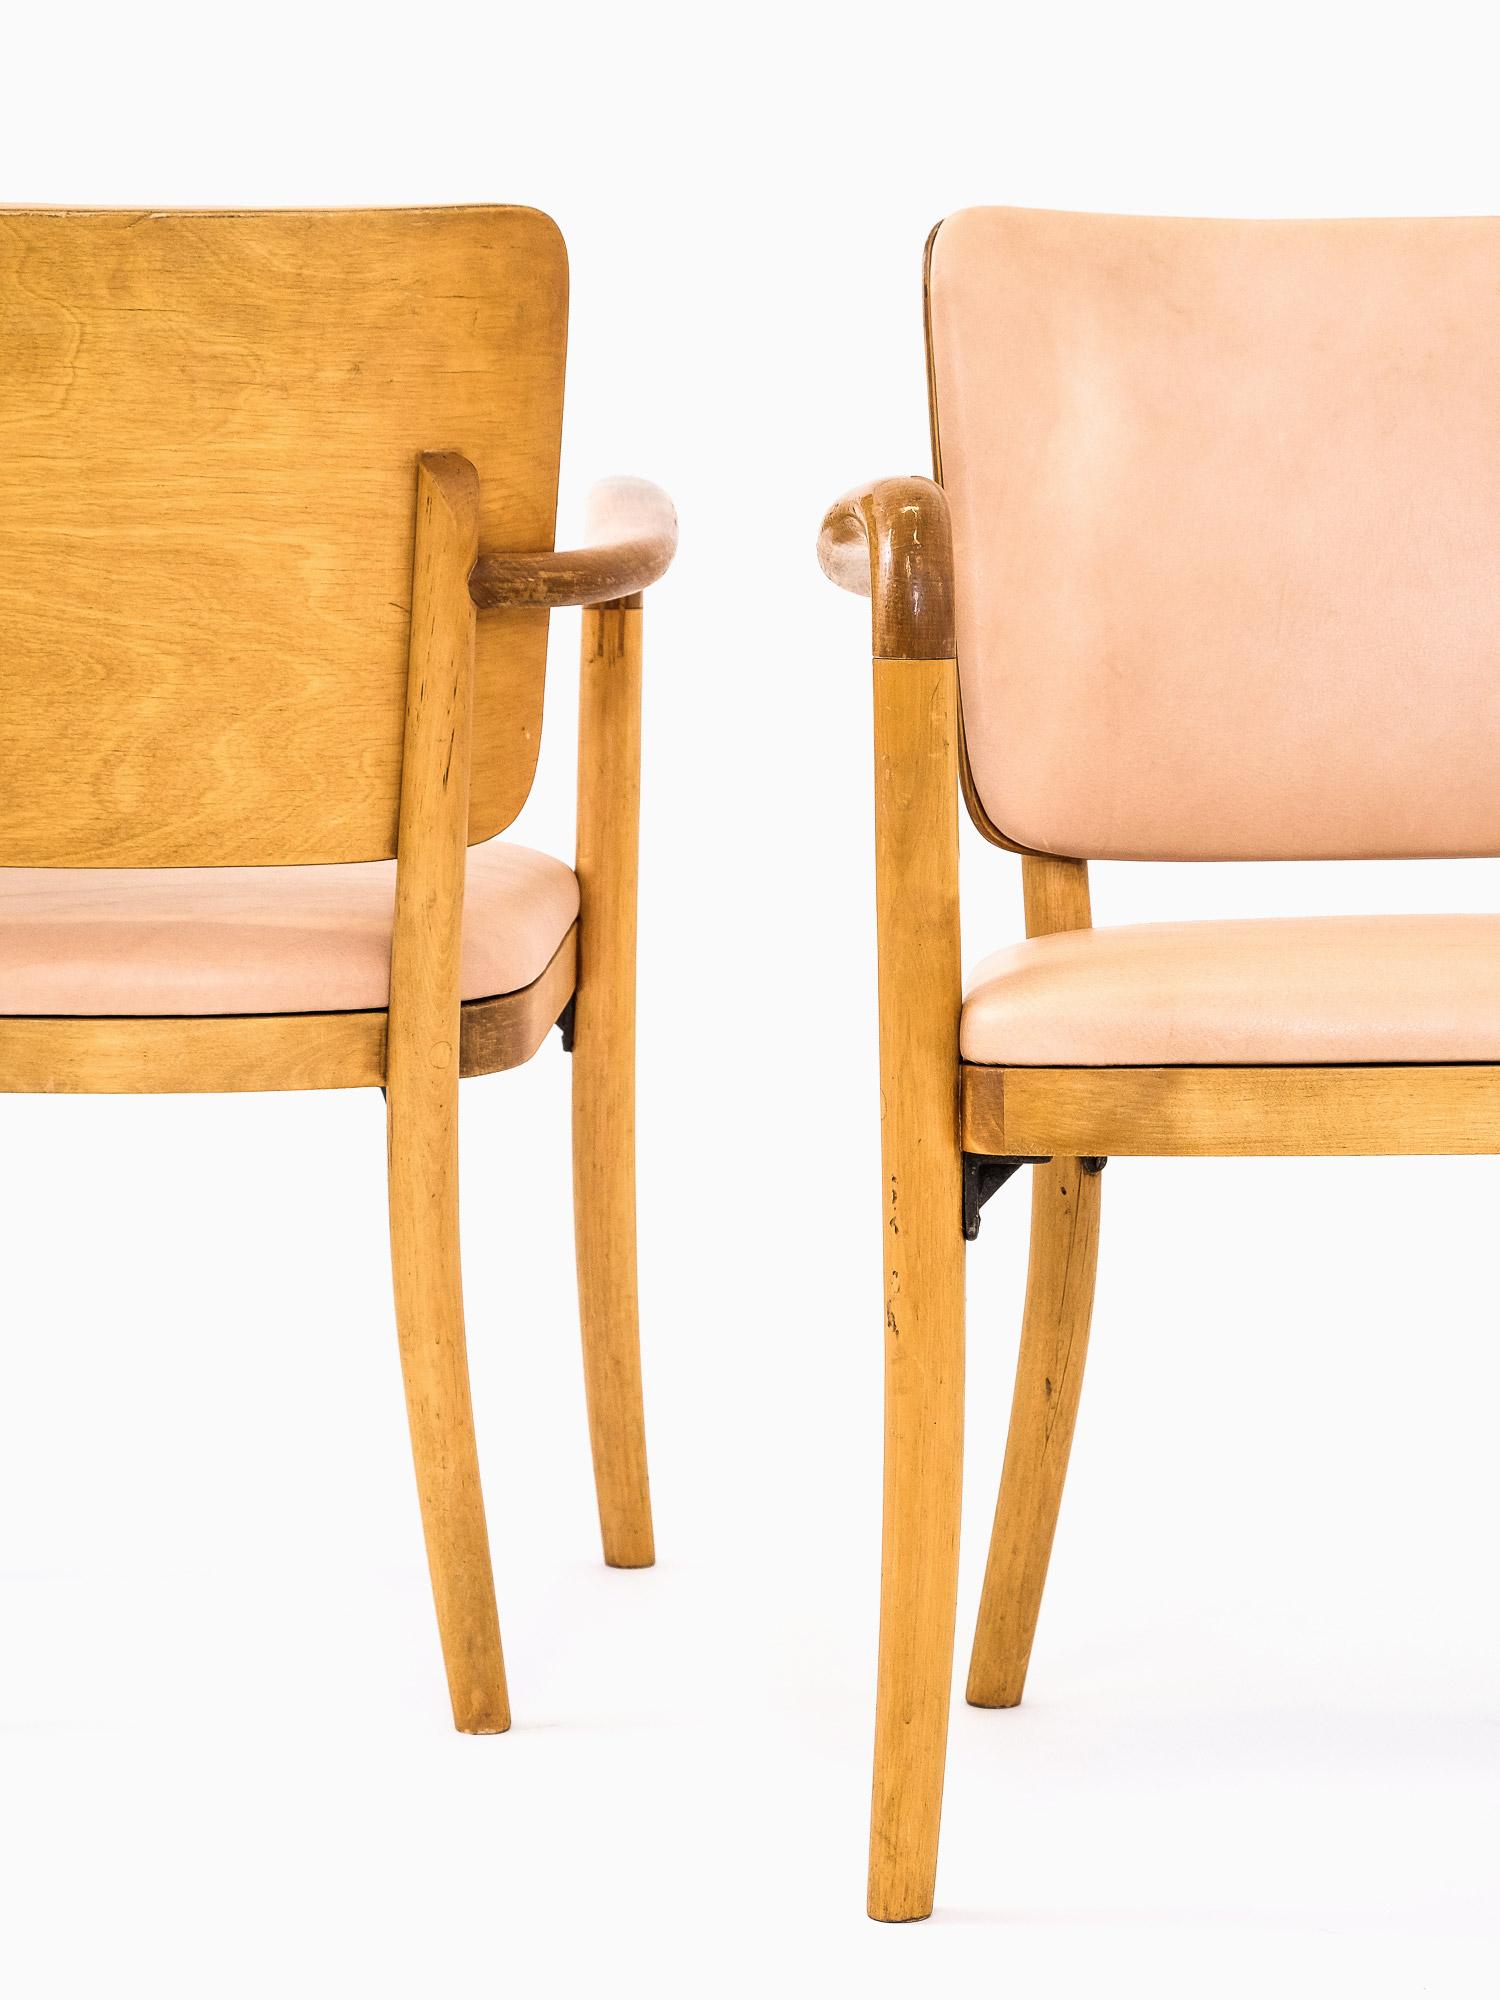 Veneer Pair of 1940s Birch & Aniline Leather Armchairs Designed by Werner West, Finland